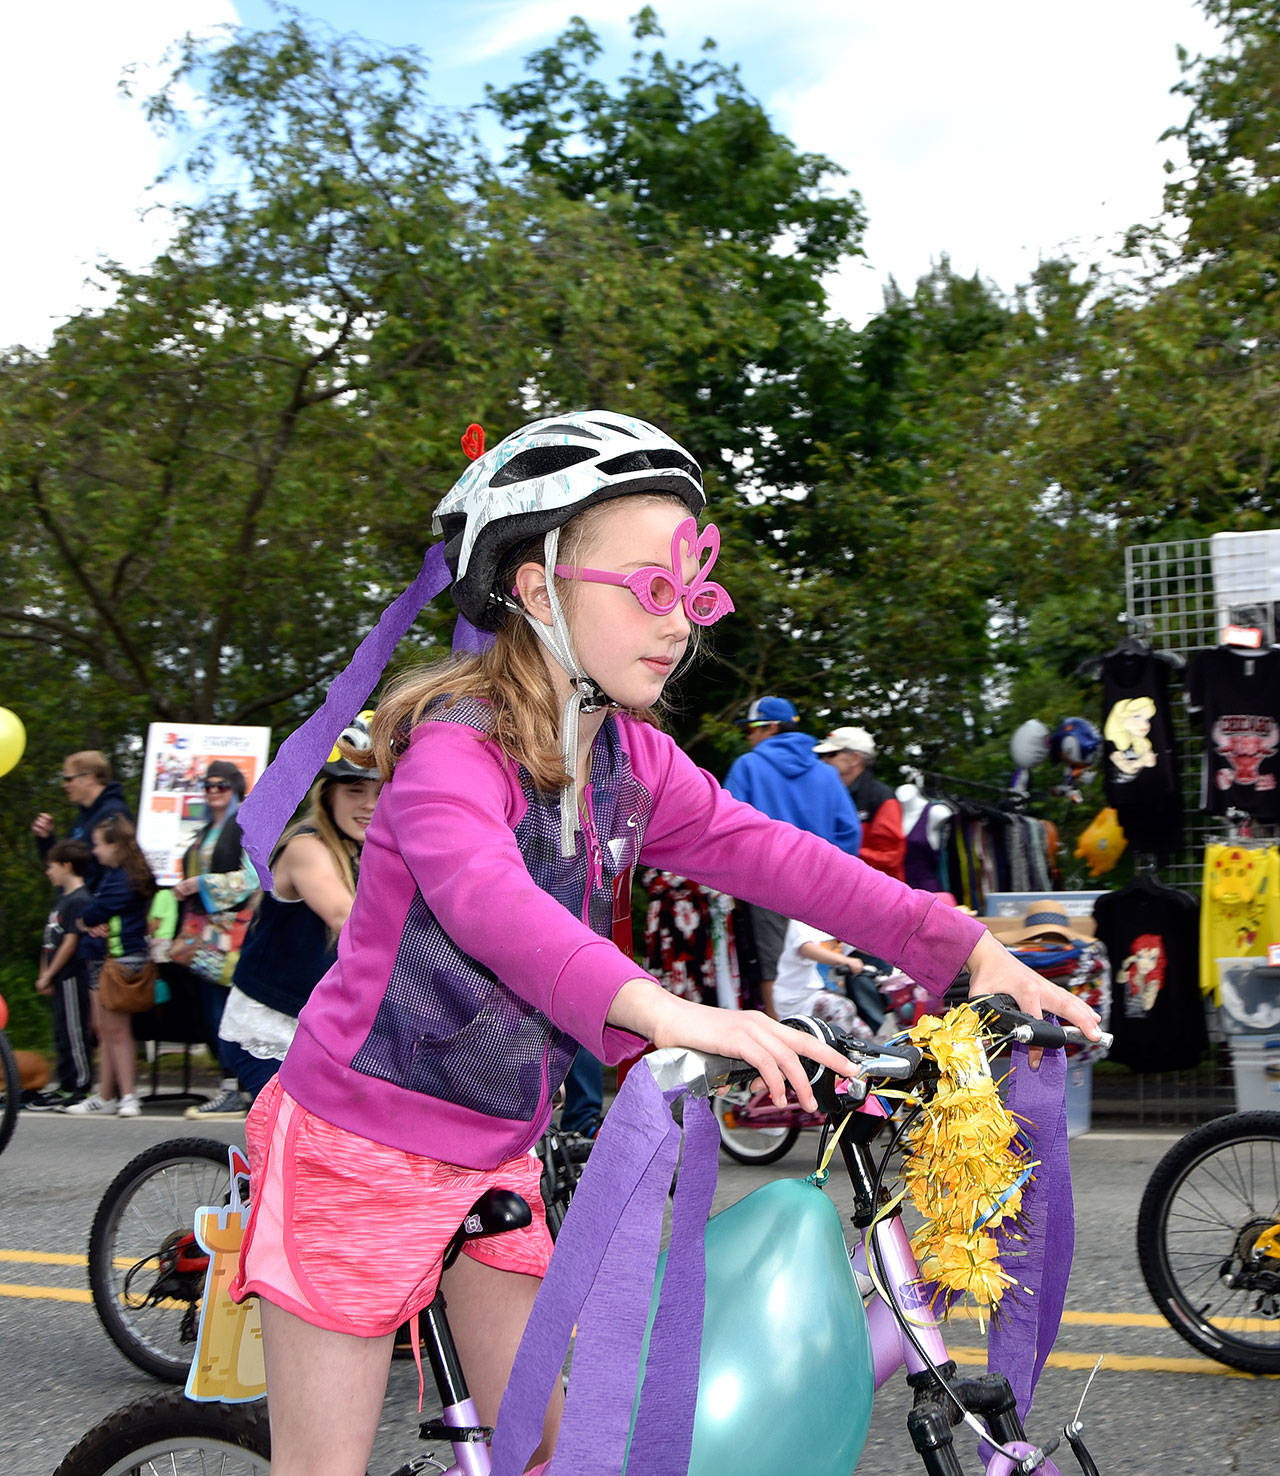 Kids on bikes rode through the Fall City Day parade in a variety of costumes. (Carol Ladwig/Staff Photo)